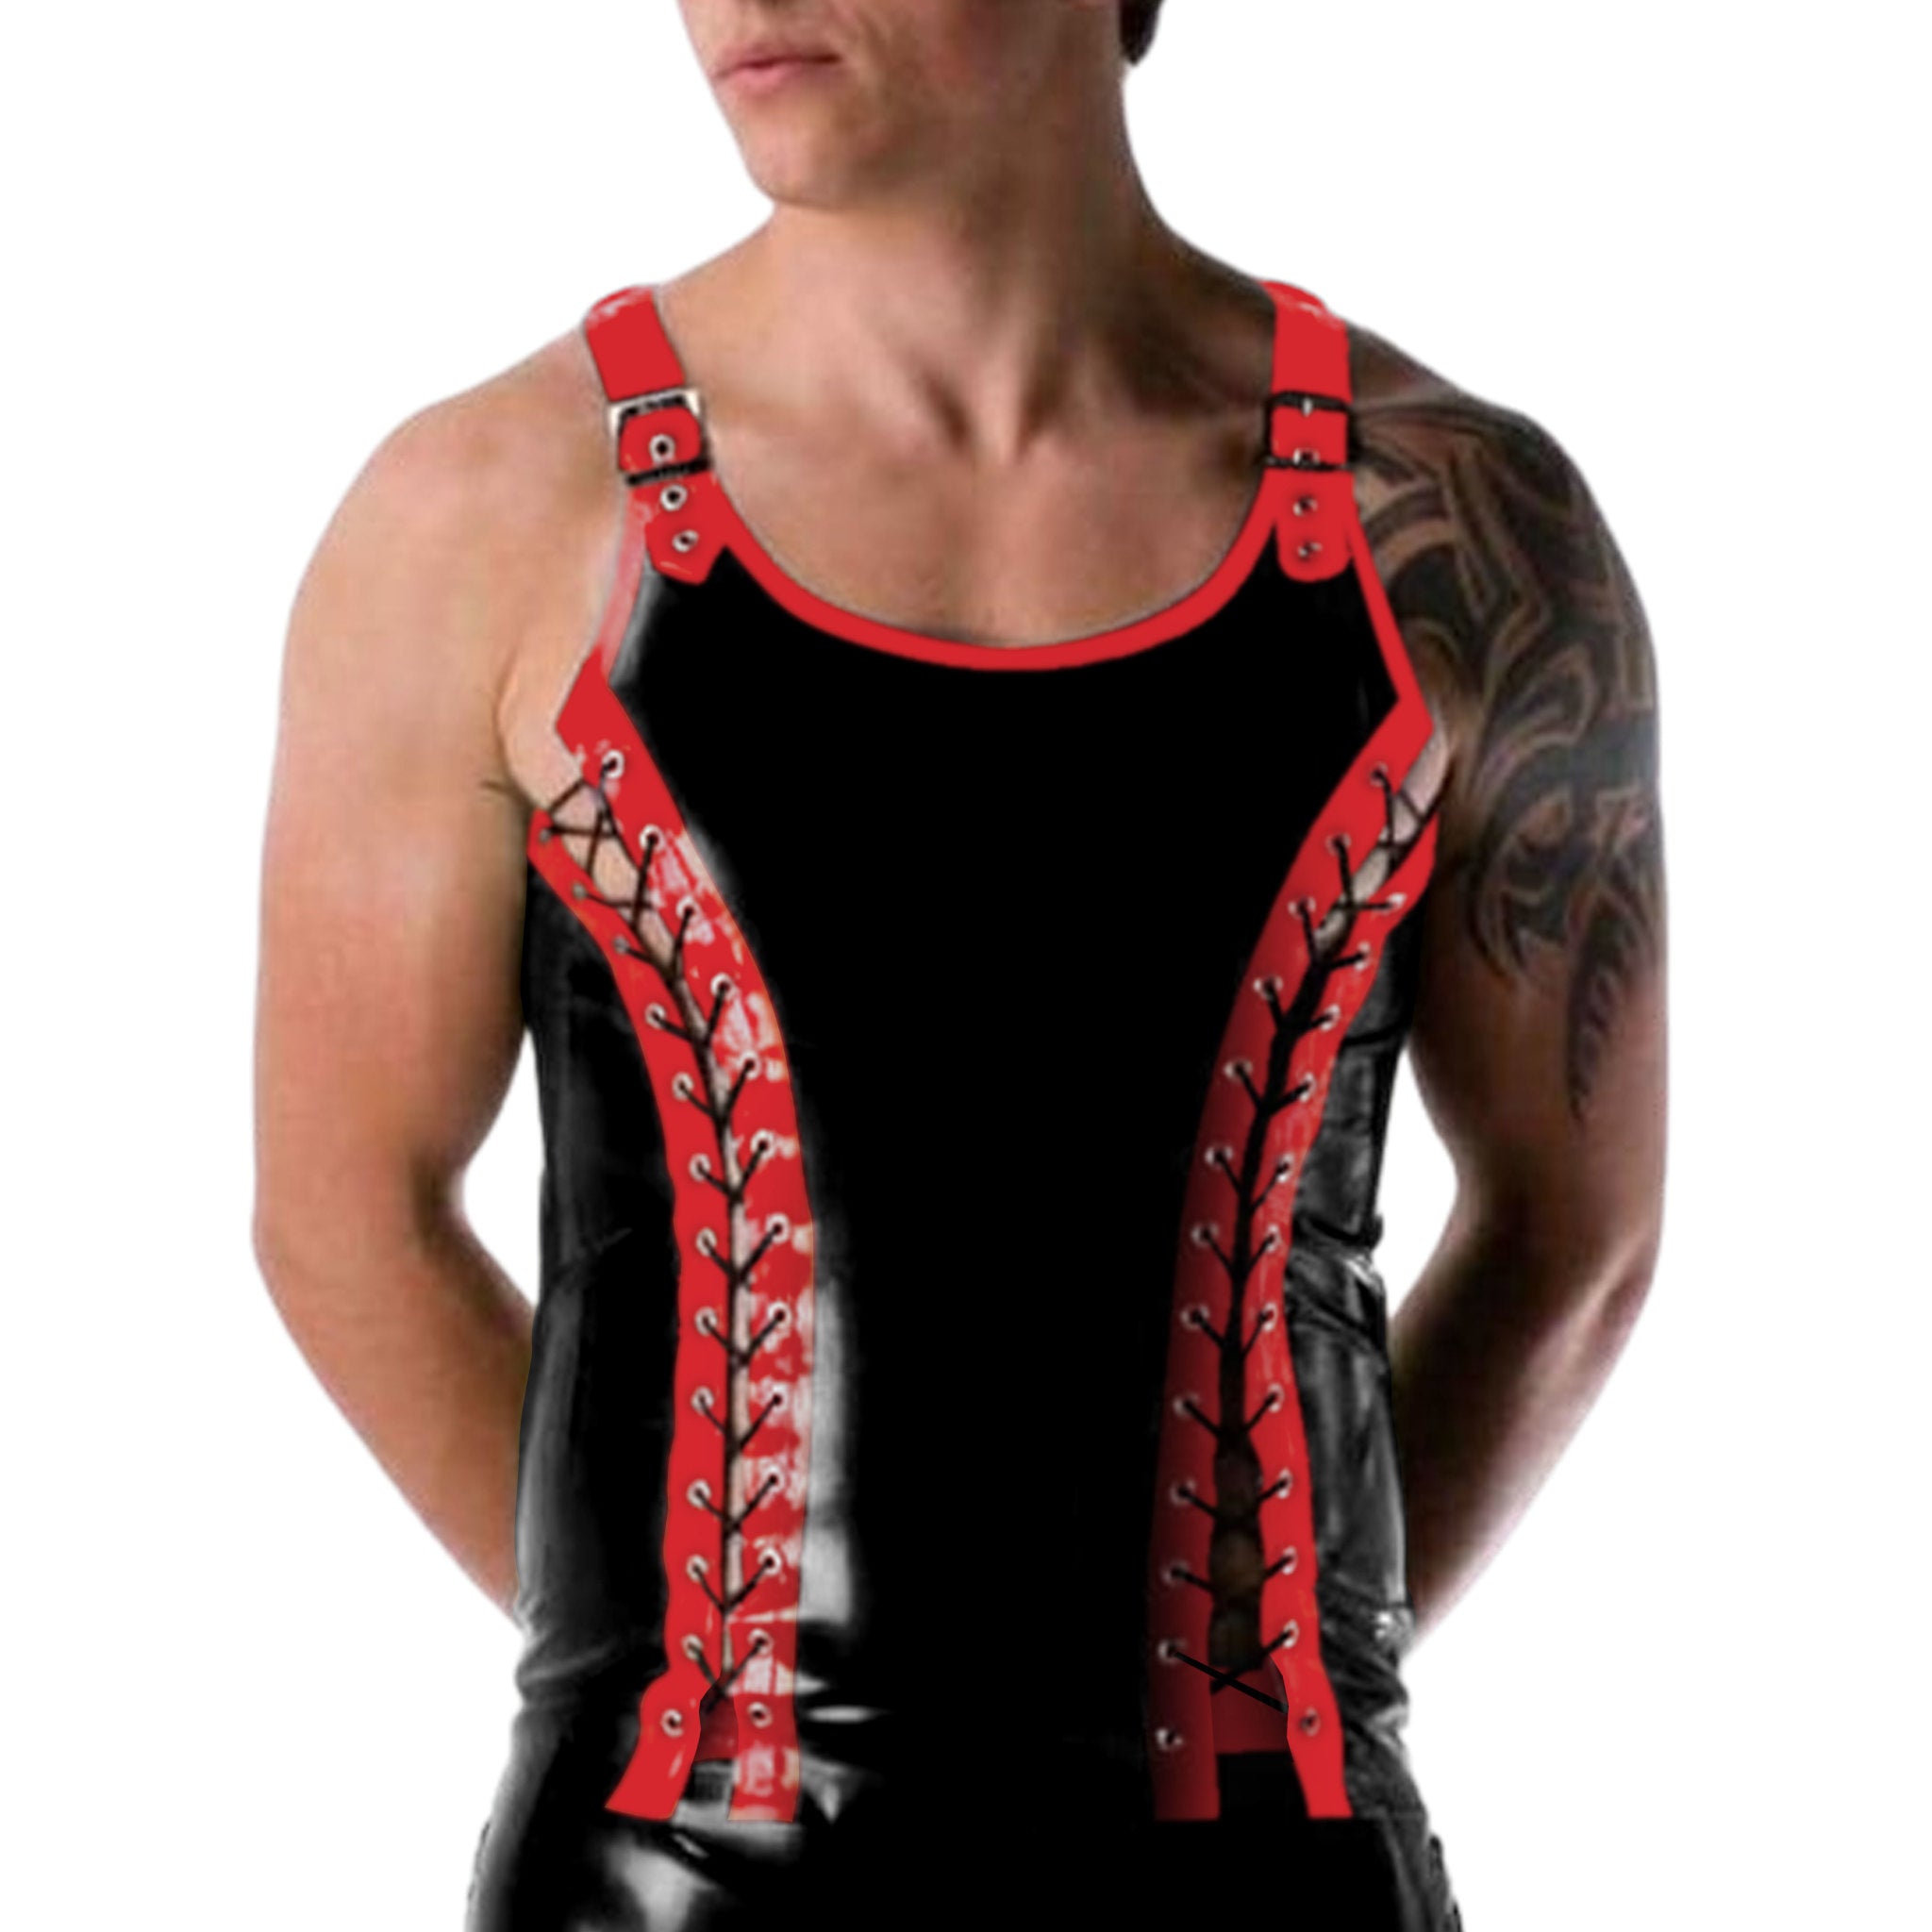 Buckle Straps Double Front Lace Latex Tank Top